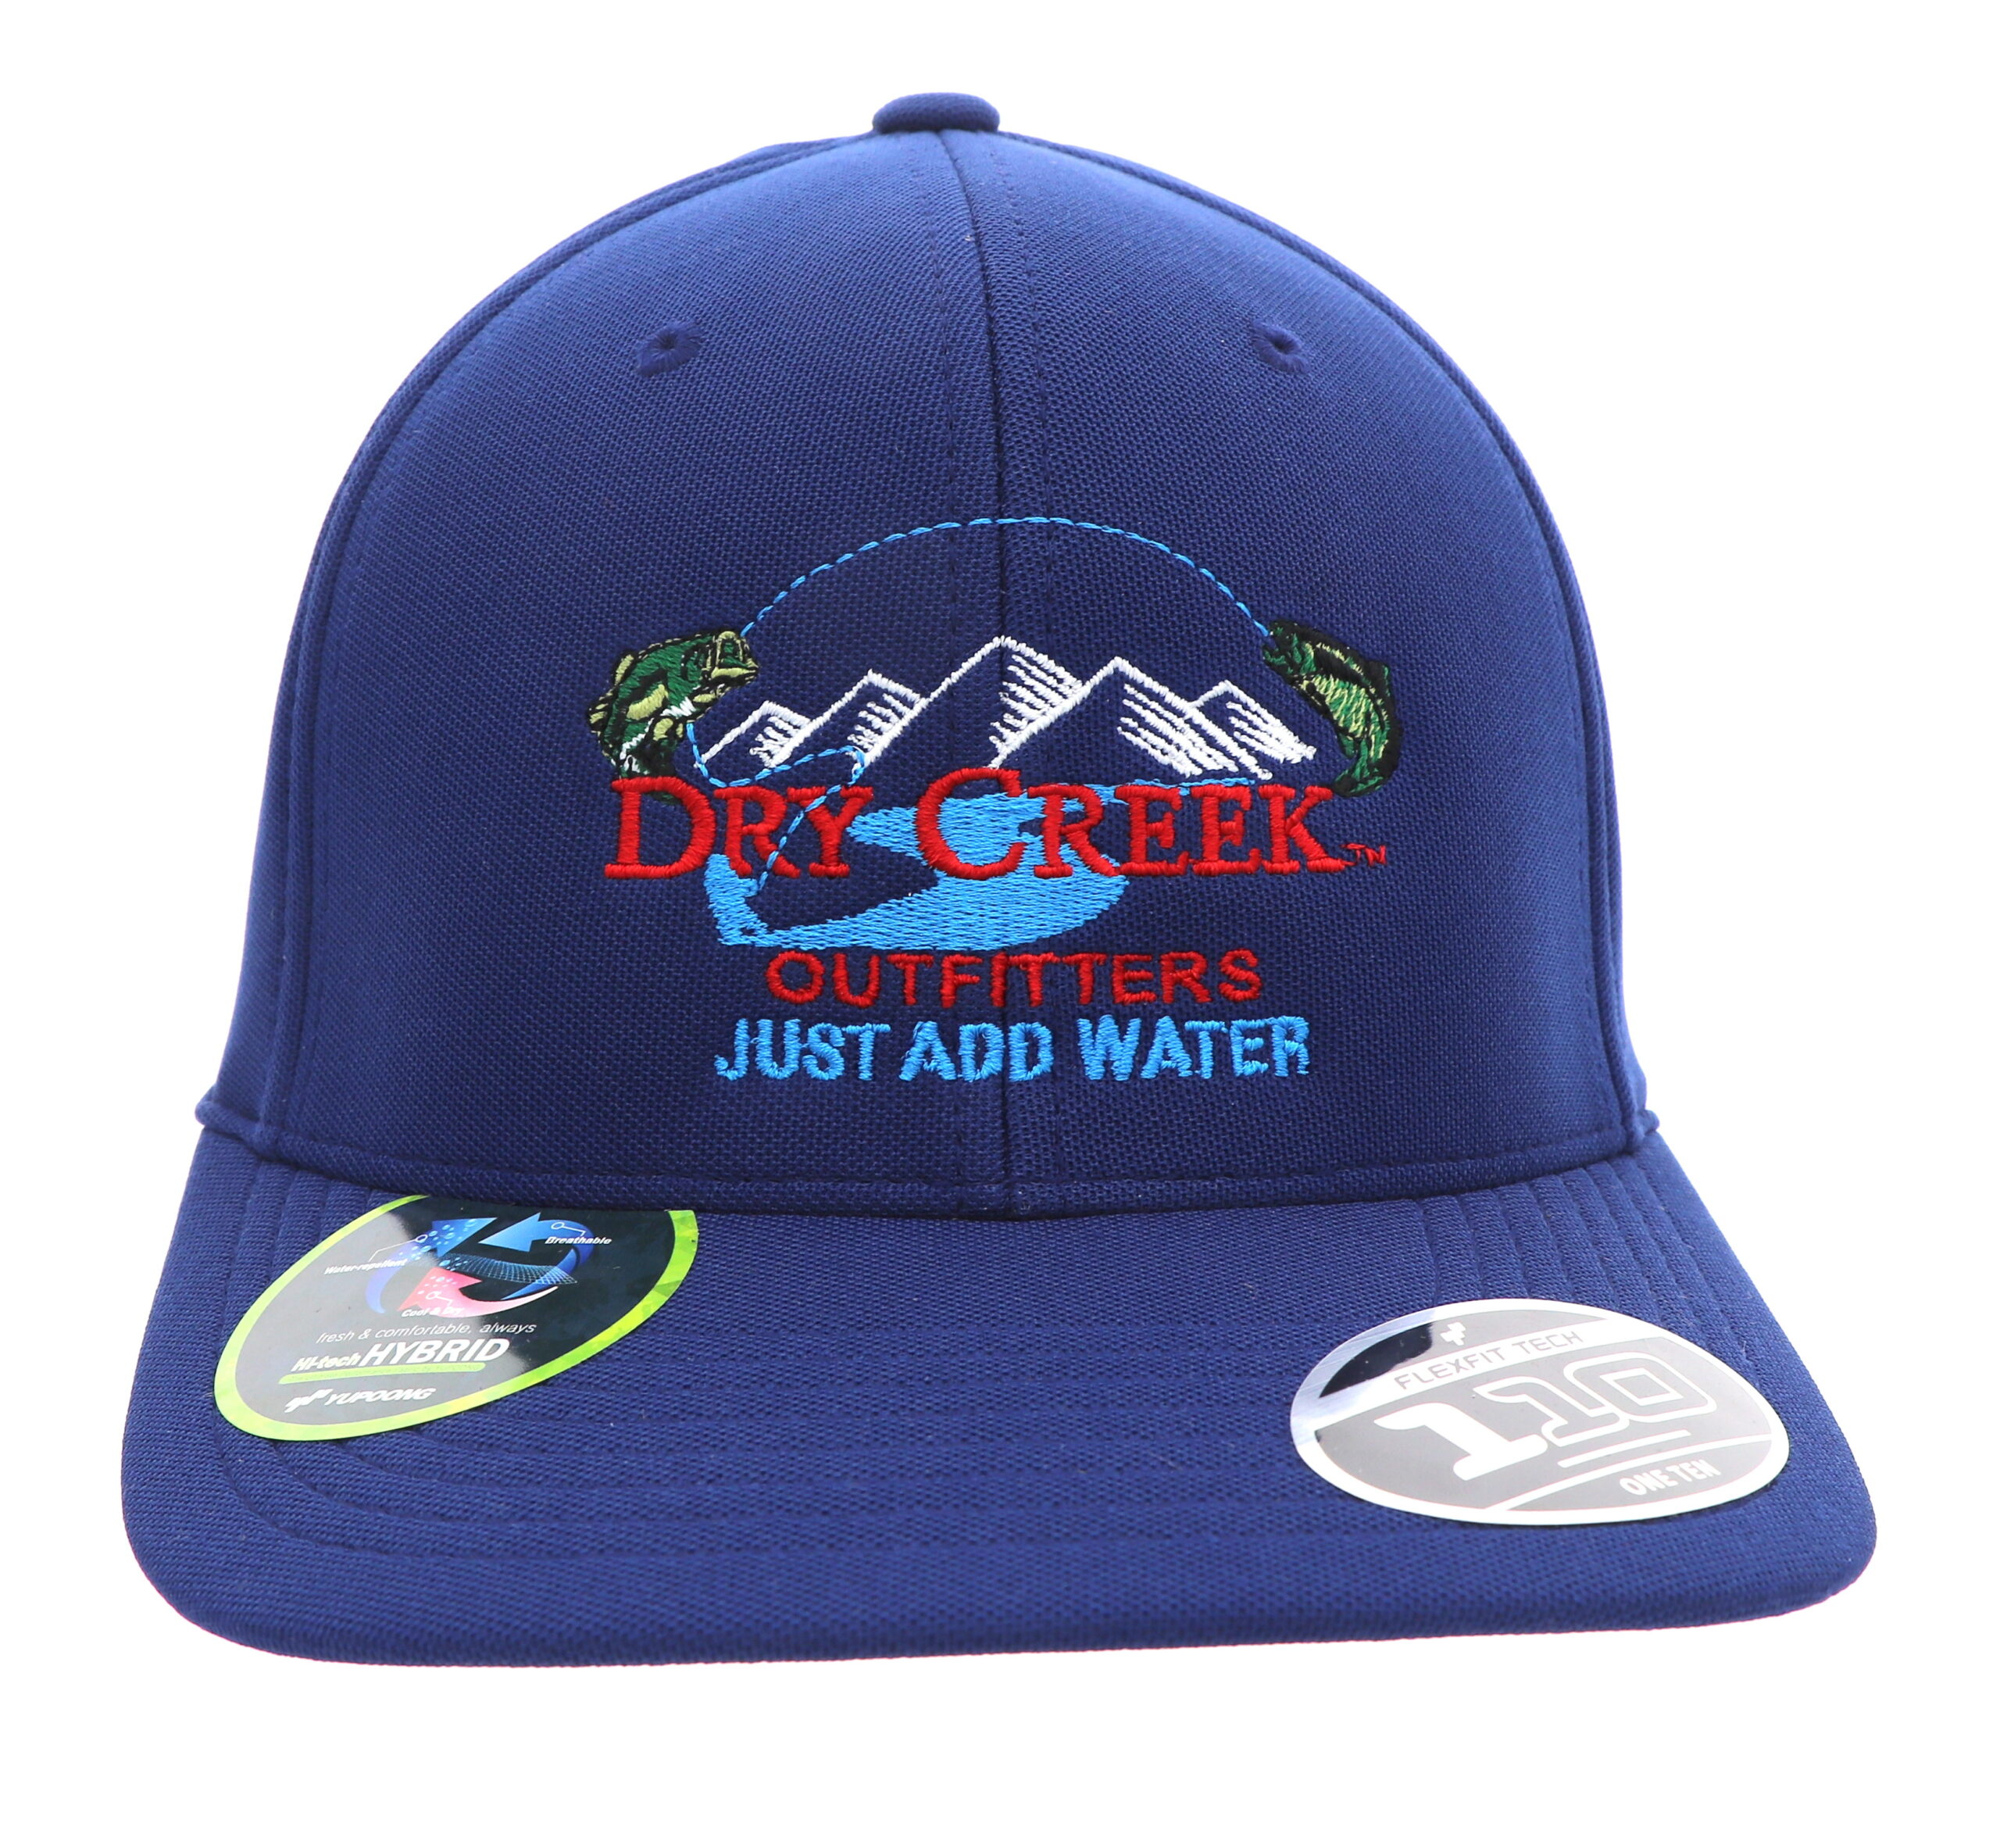 Dry Creek Creek Dry Outfitters - Hats